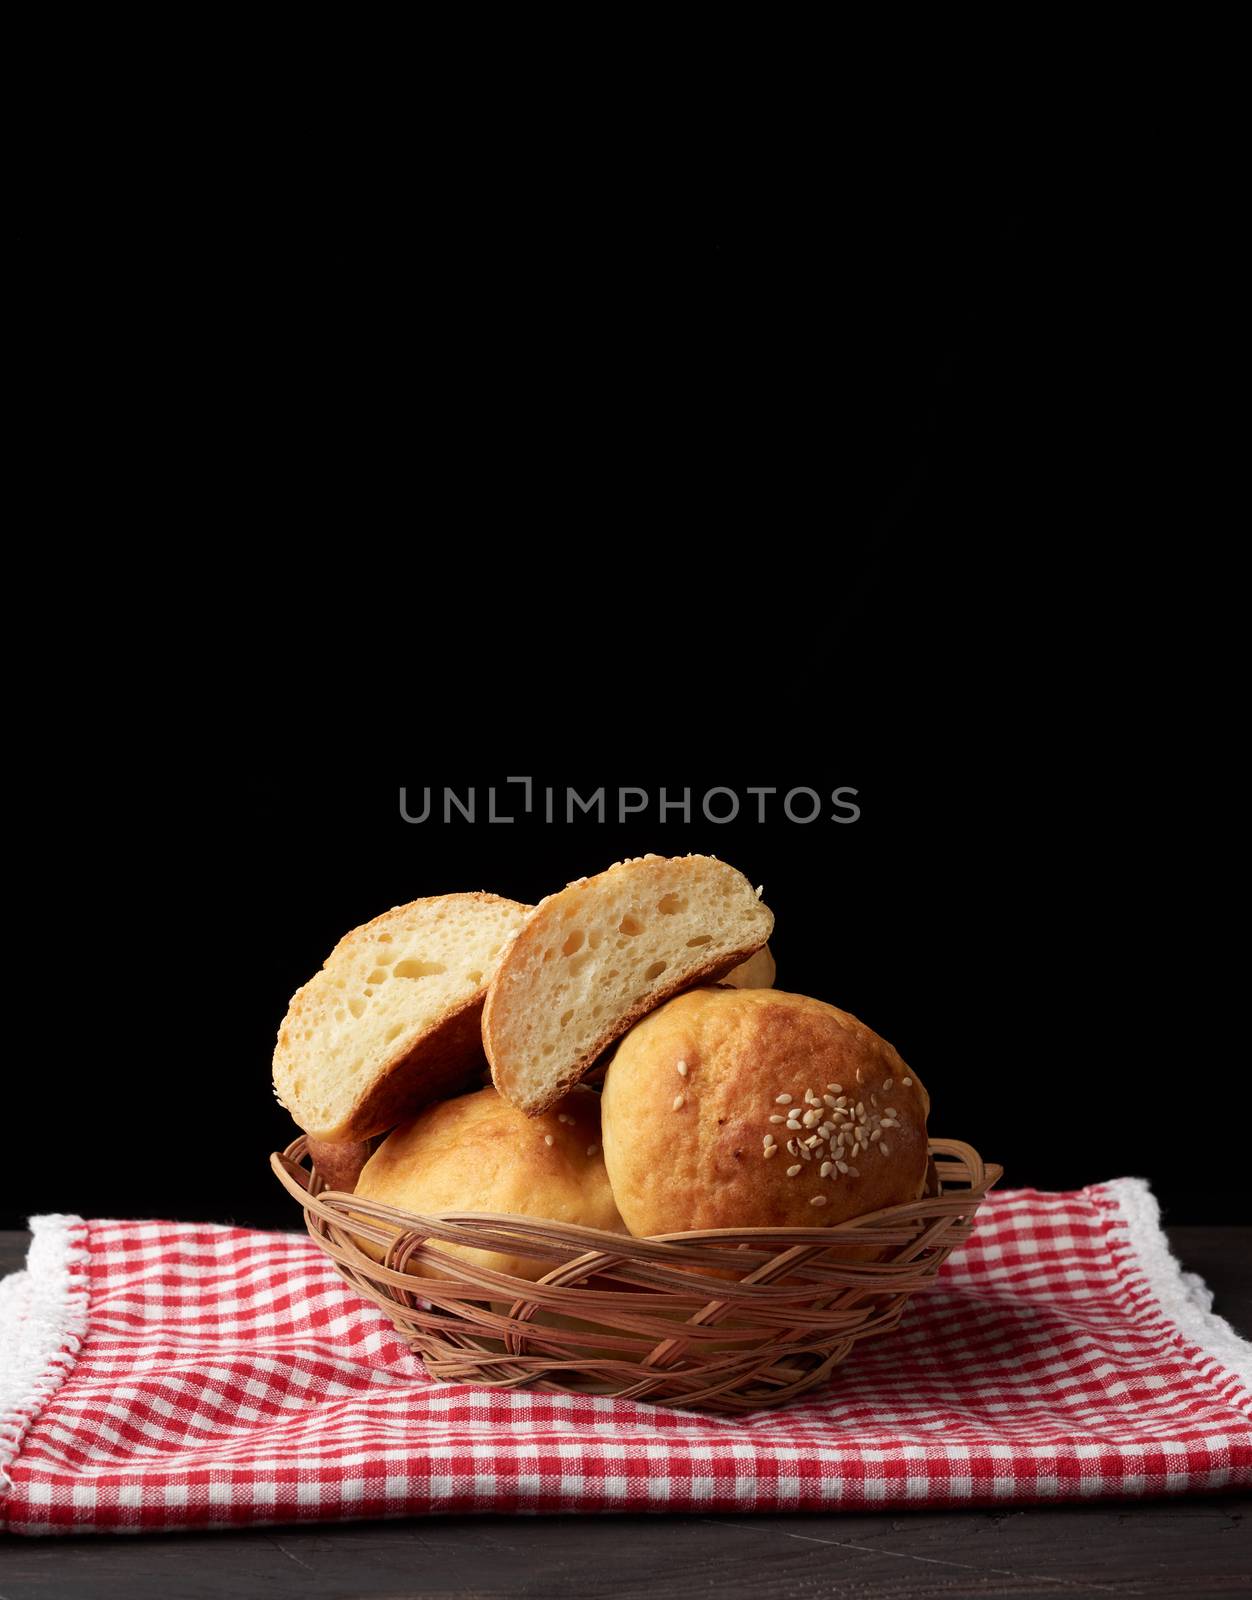 baked round bun with sesame seeds, black background, home baking by ndanko